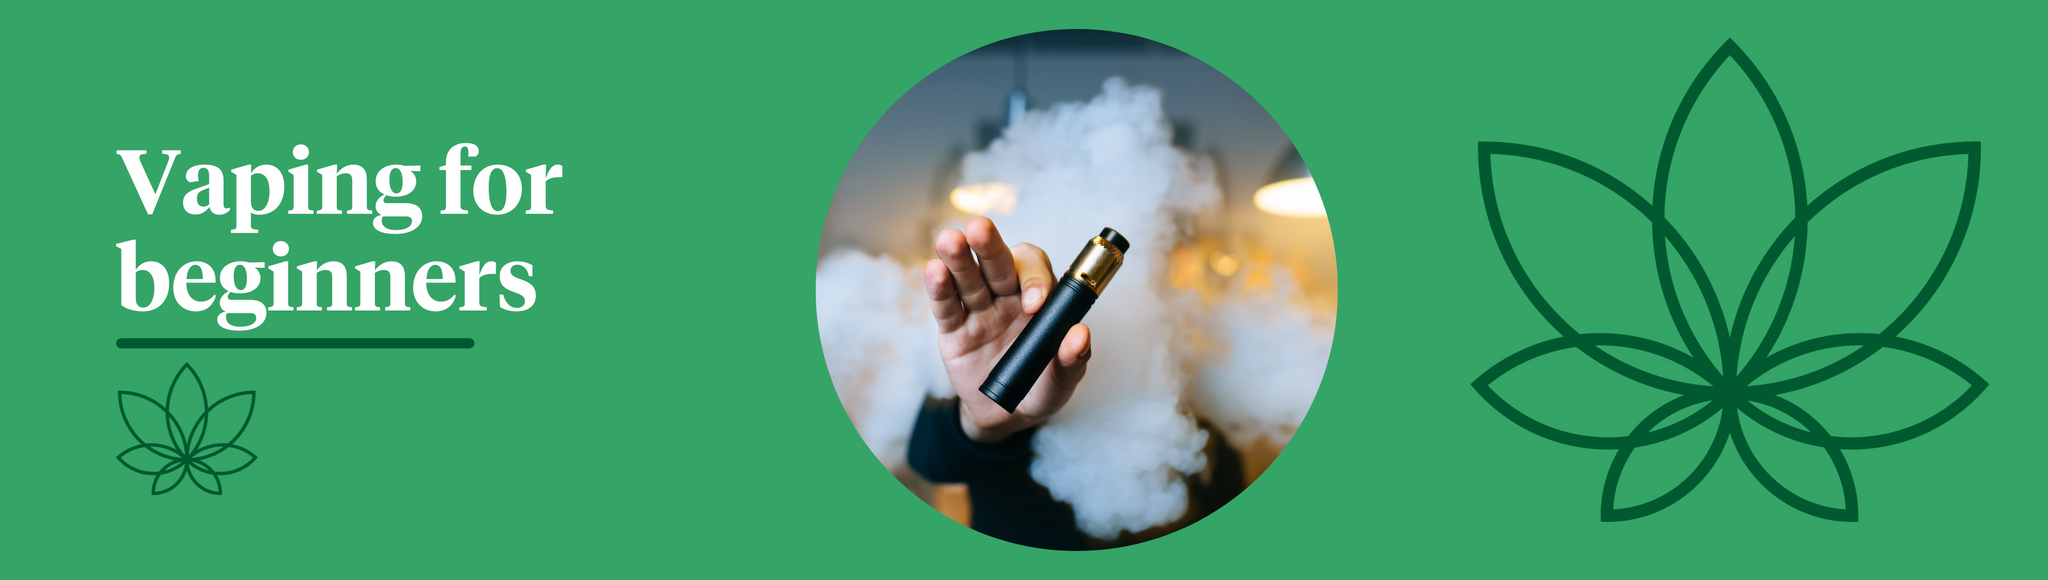 A green background with the Supreme CBD logo on the far right with a person holding a vape pen through vape smoke in the centre. To the left, white text saying "Vaping for beginners."